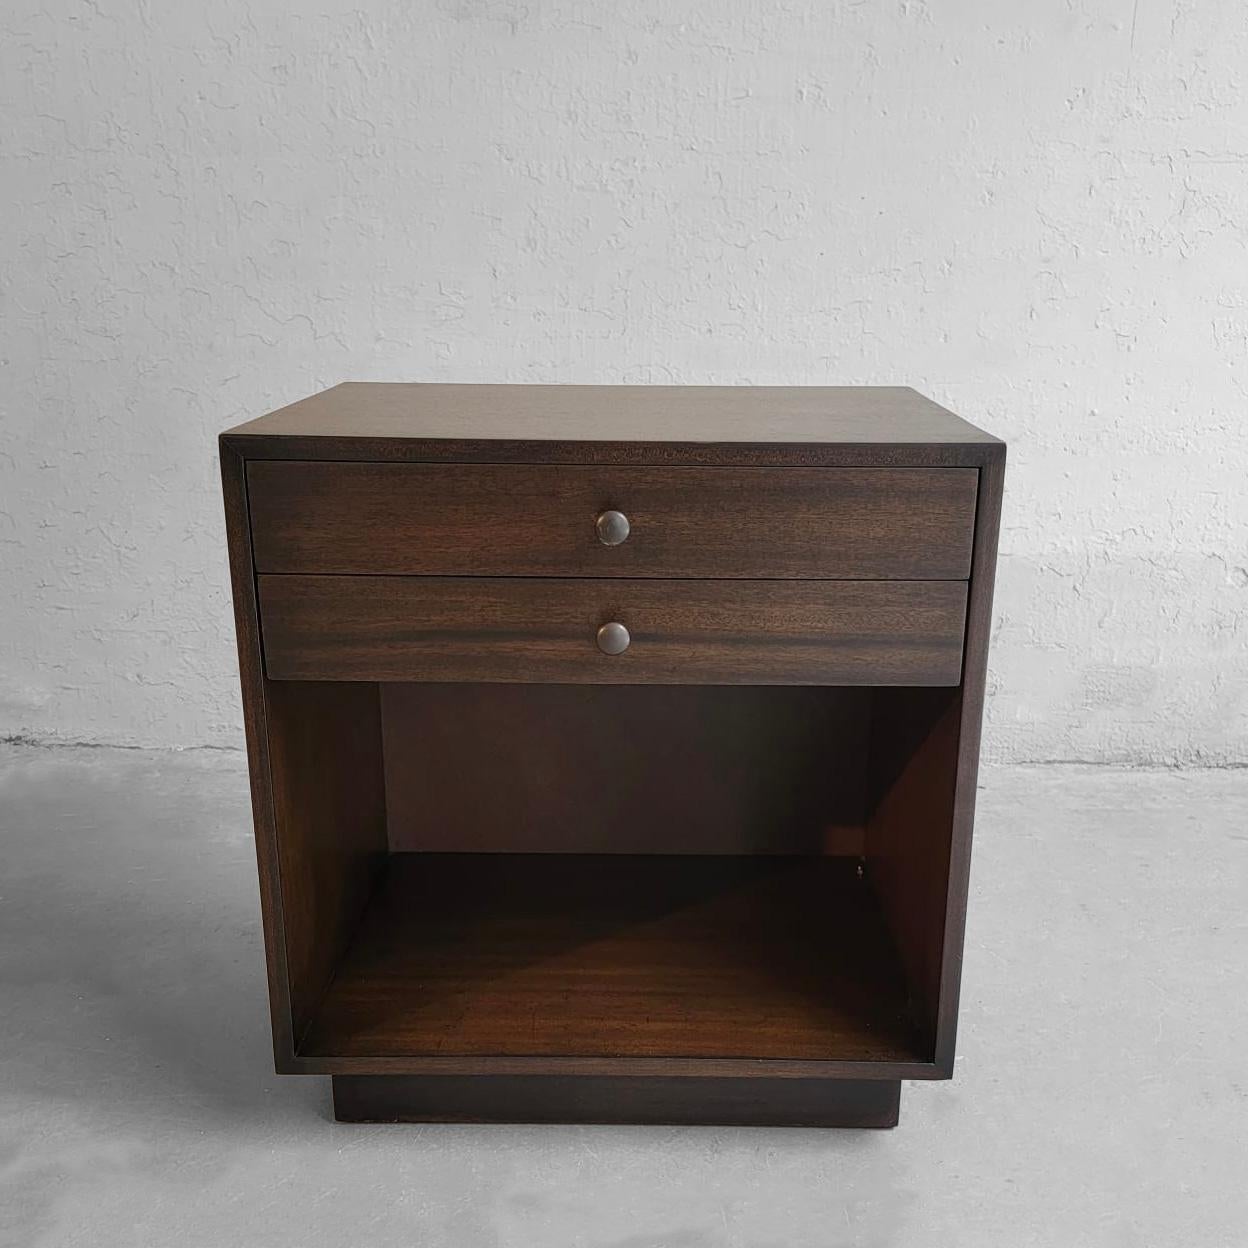 Single. Mid-Century Modern, mahogany end table or nighstand by Harvey Probber features two drawers with open storage space on a platform base.